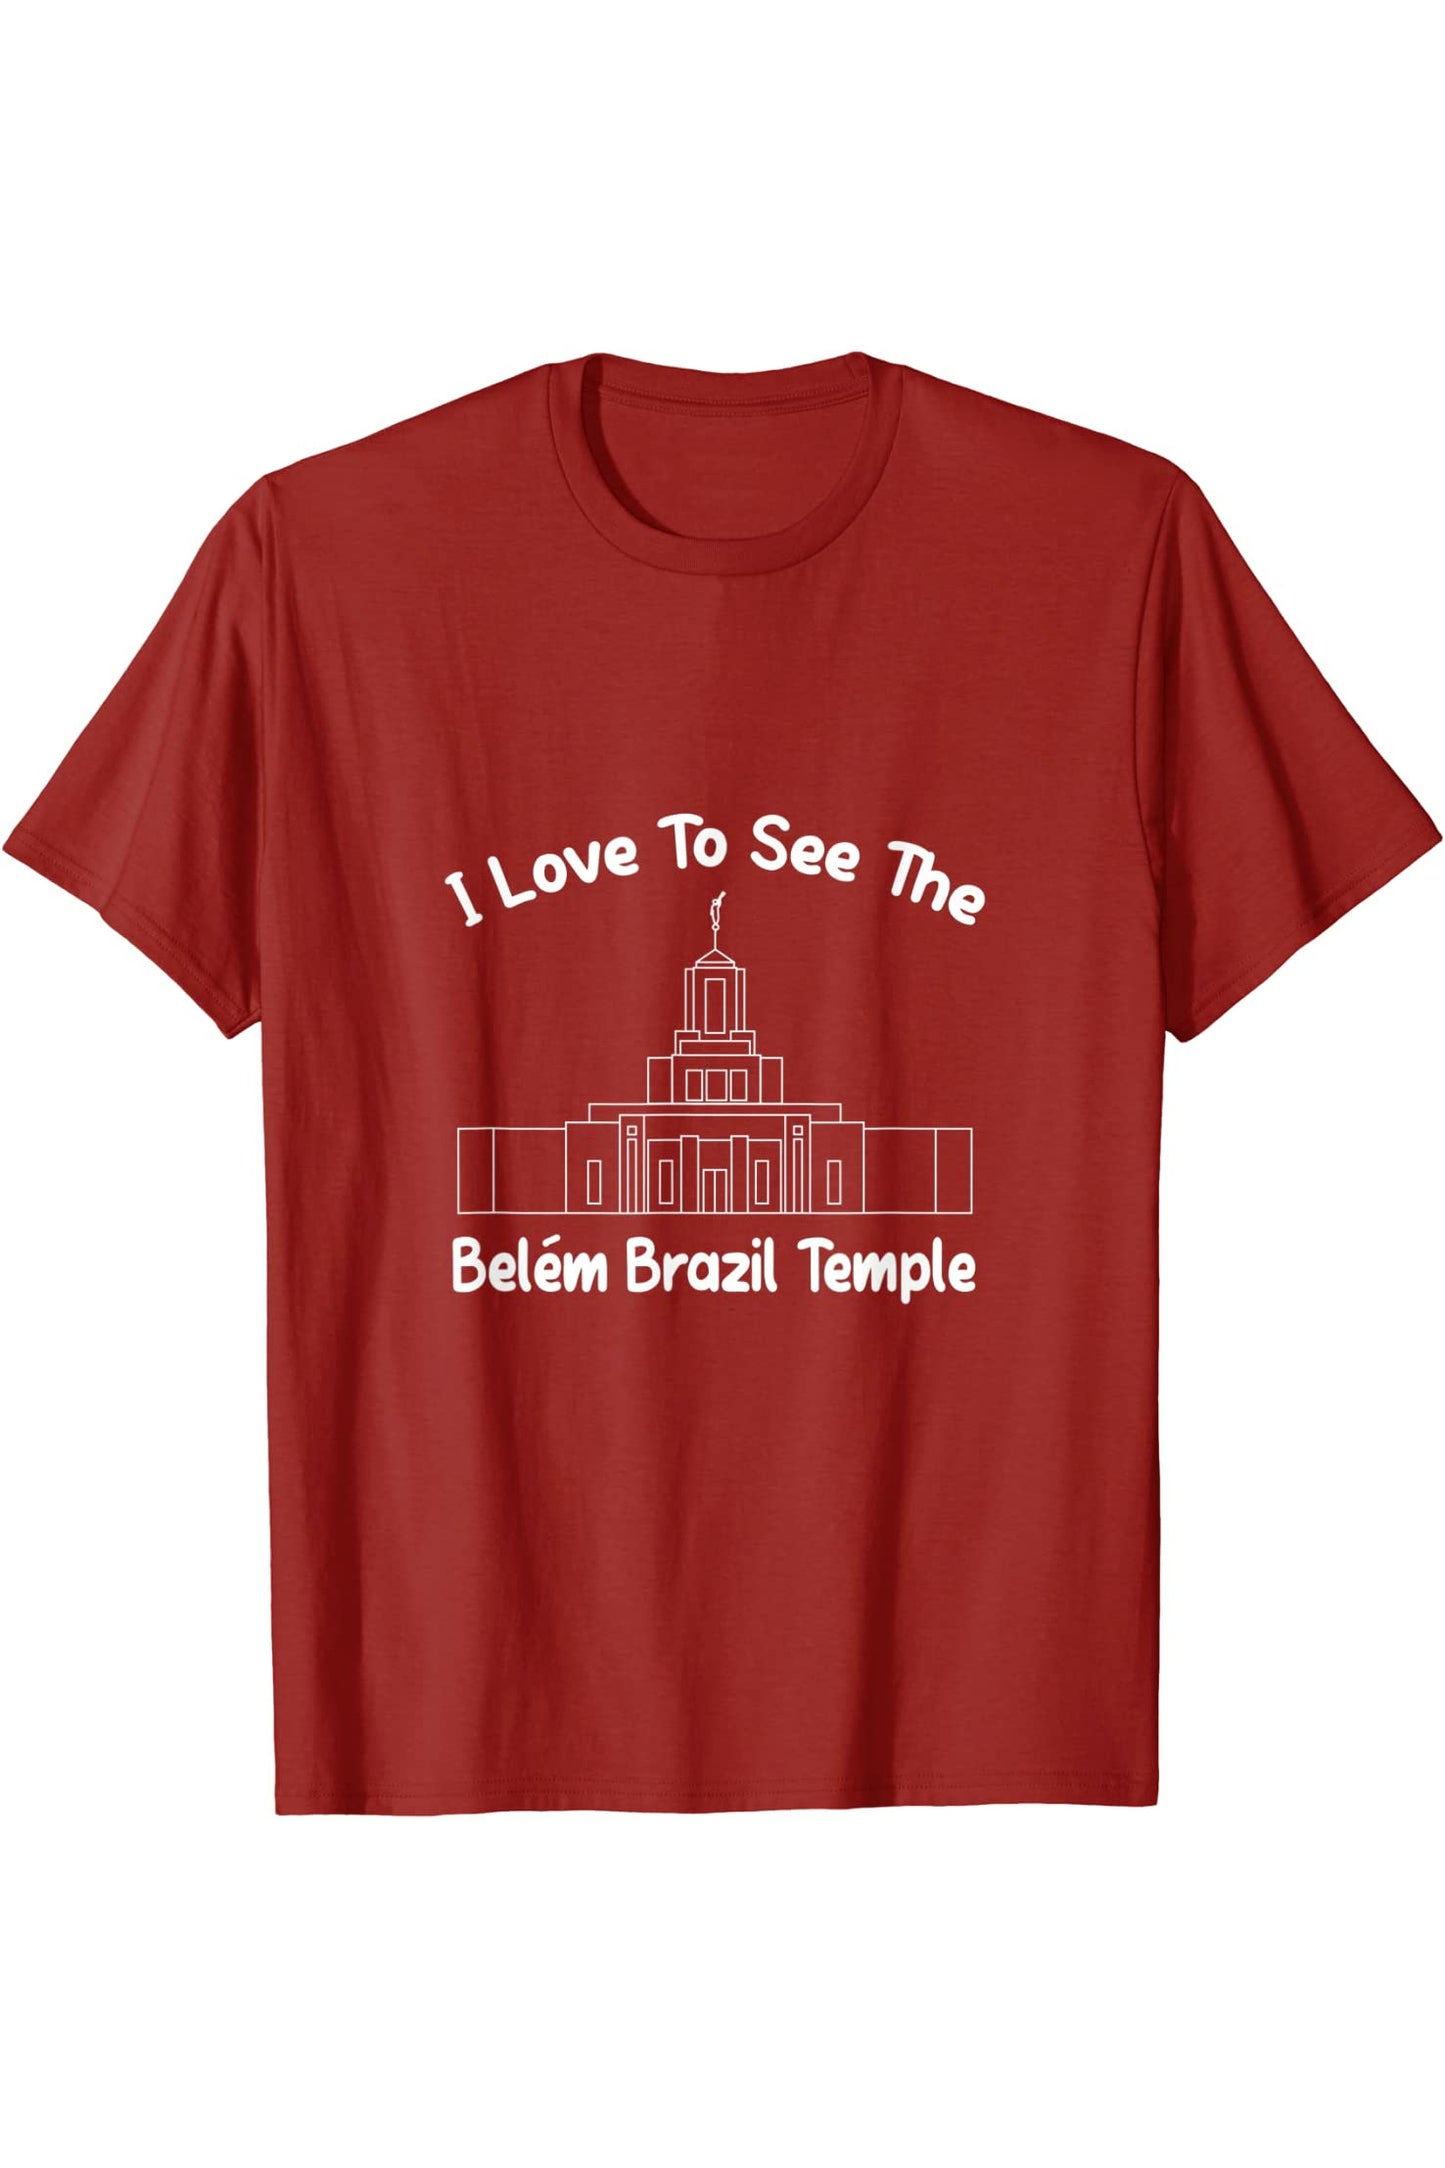 Belem Brazil Temple T-Shirt - Primary Style (English) US